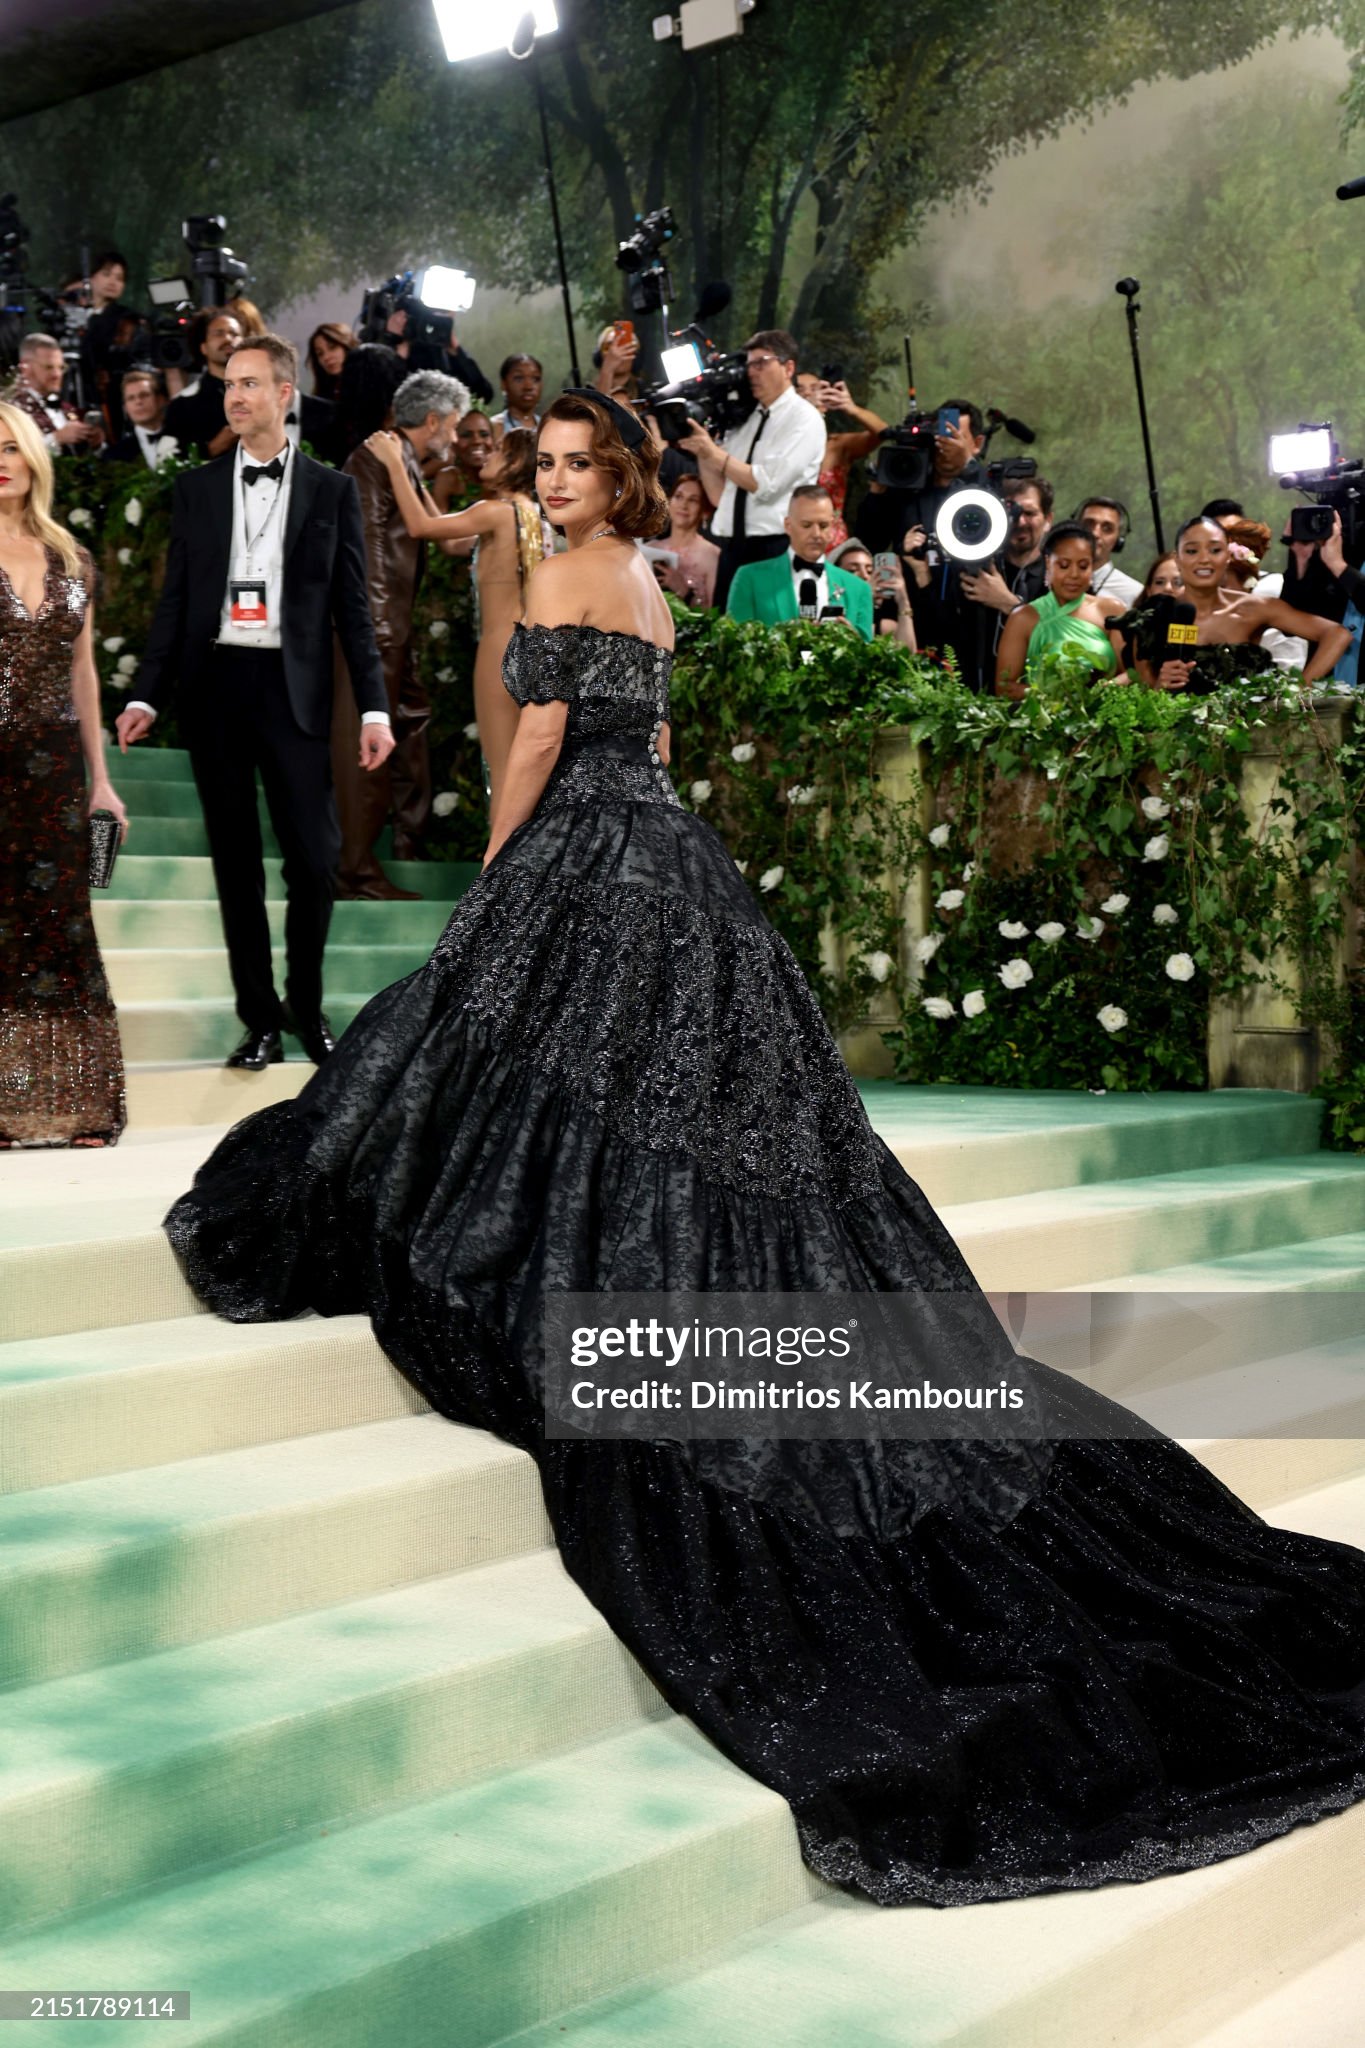 gettyimages-2151789114-2048x2048.jpg